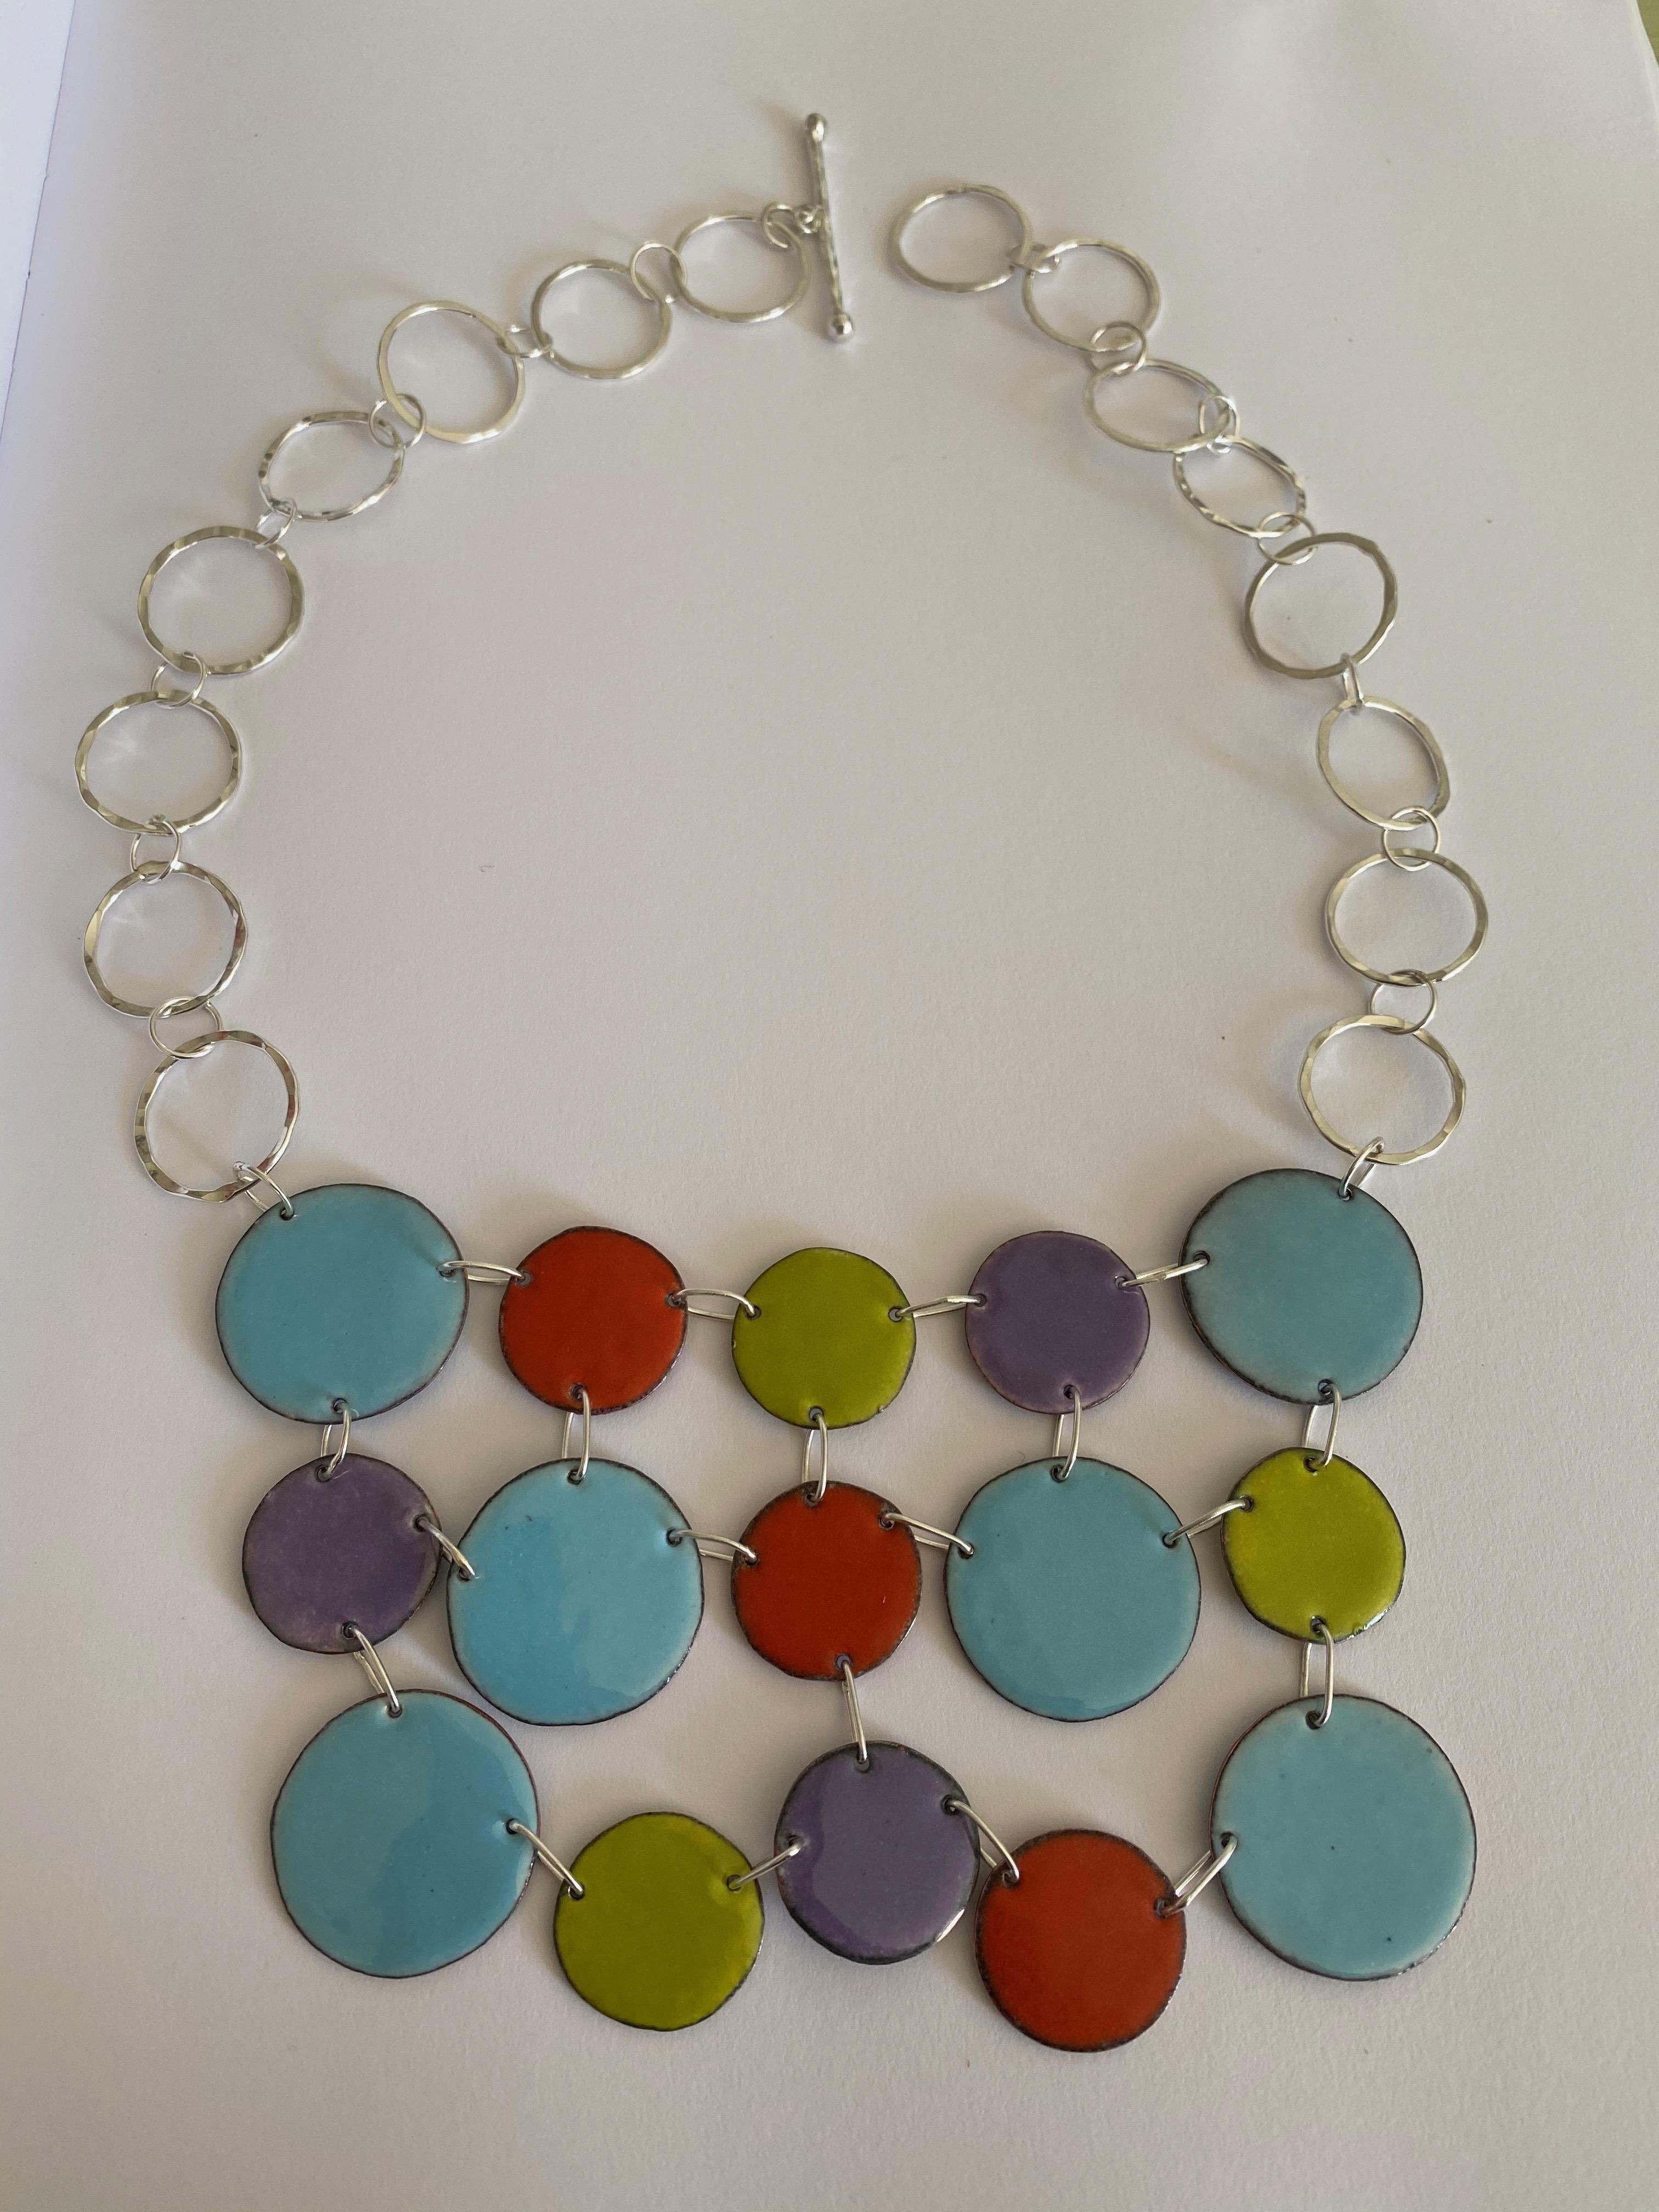 Women's Shades of Blue Sterling Silver Bib Necklace with Enamel Hand painted  Discs. For Sale